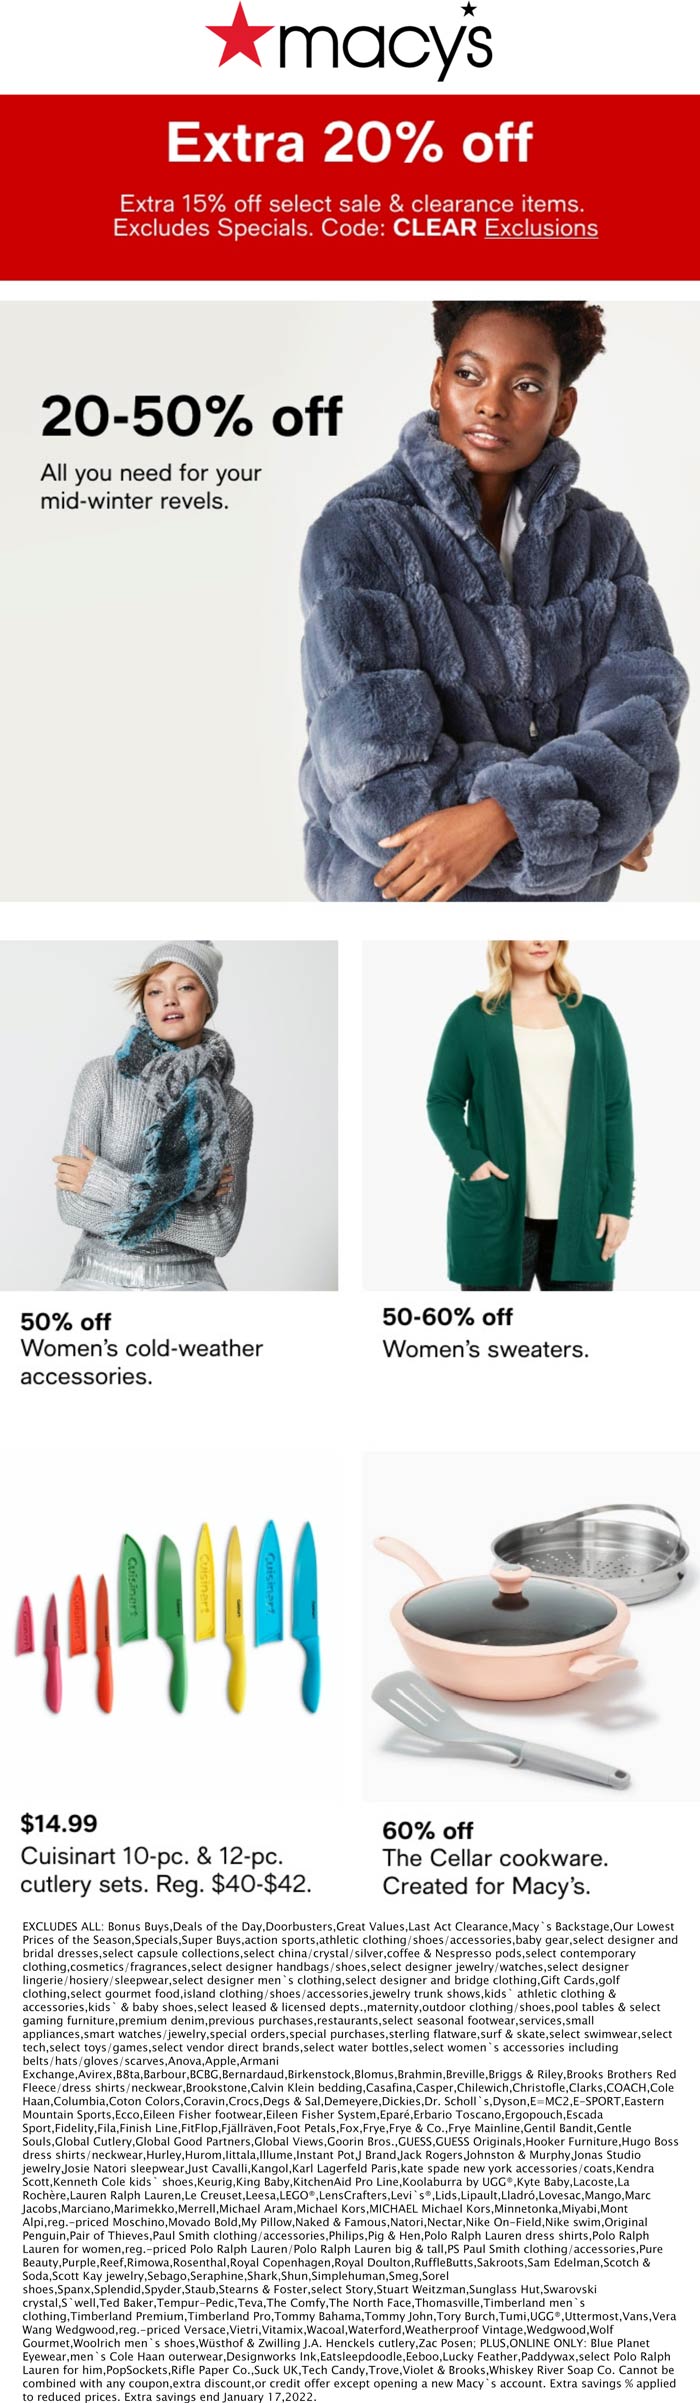 Macys stores Coupon  Extra 15-20% off at Macys, or 10% online via promo code CLEAR #macys 